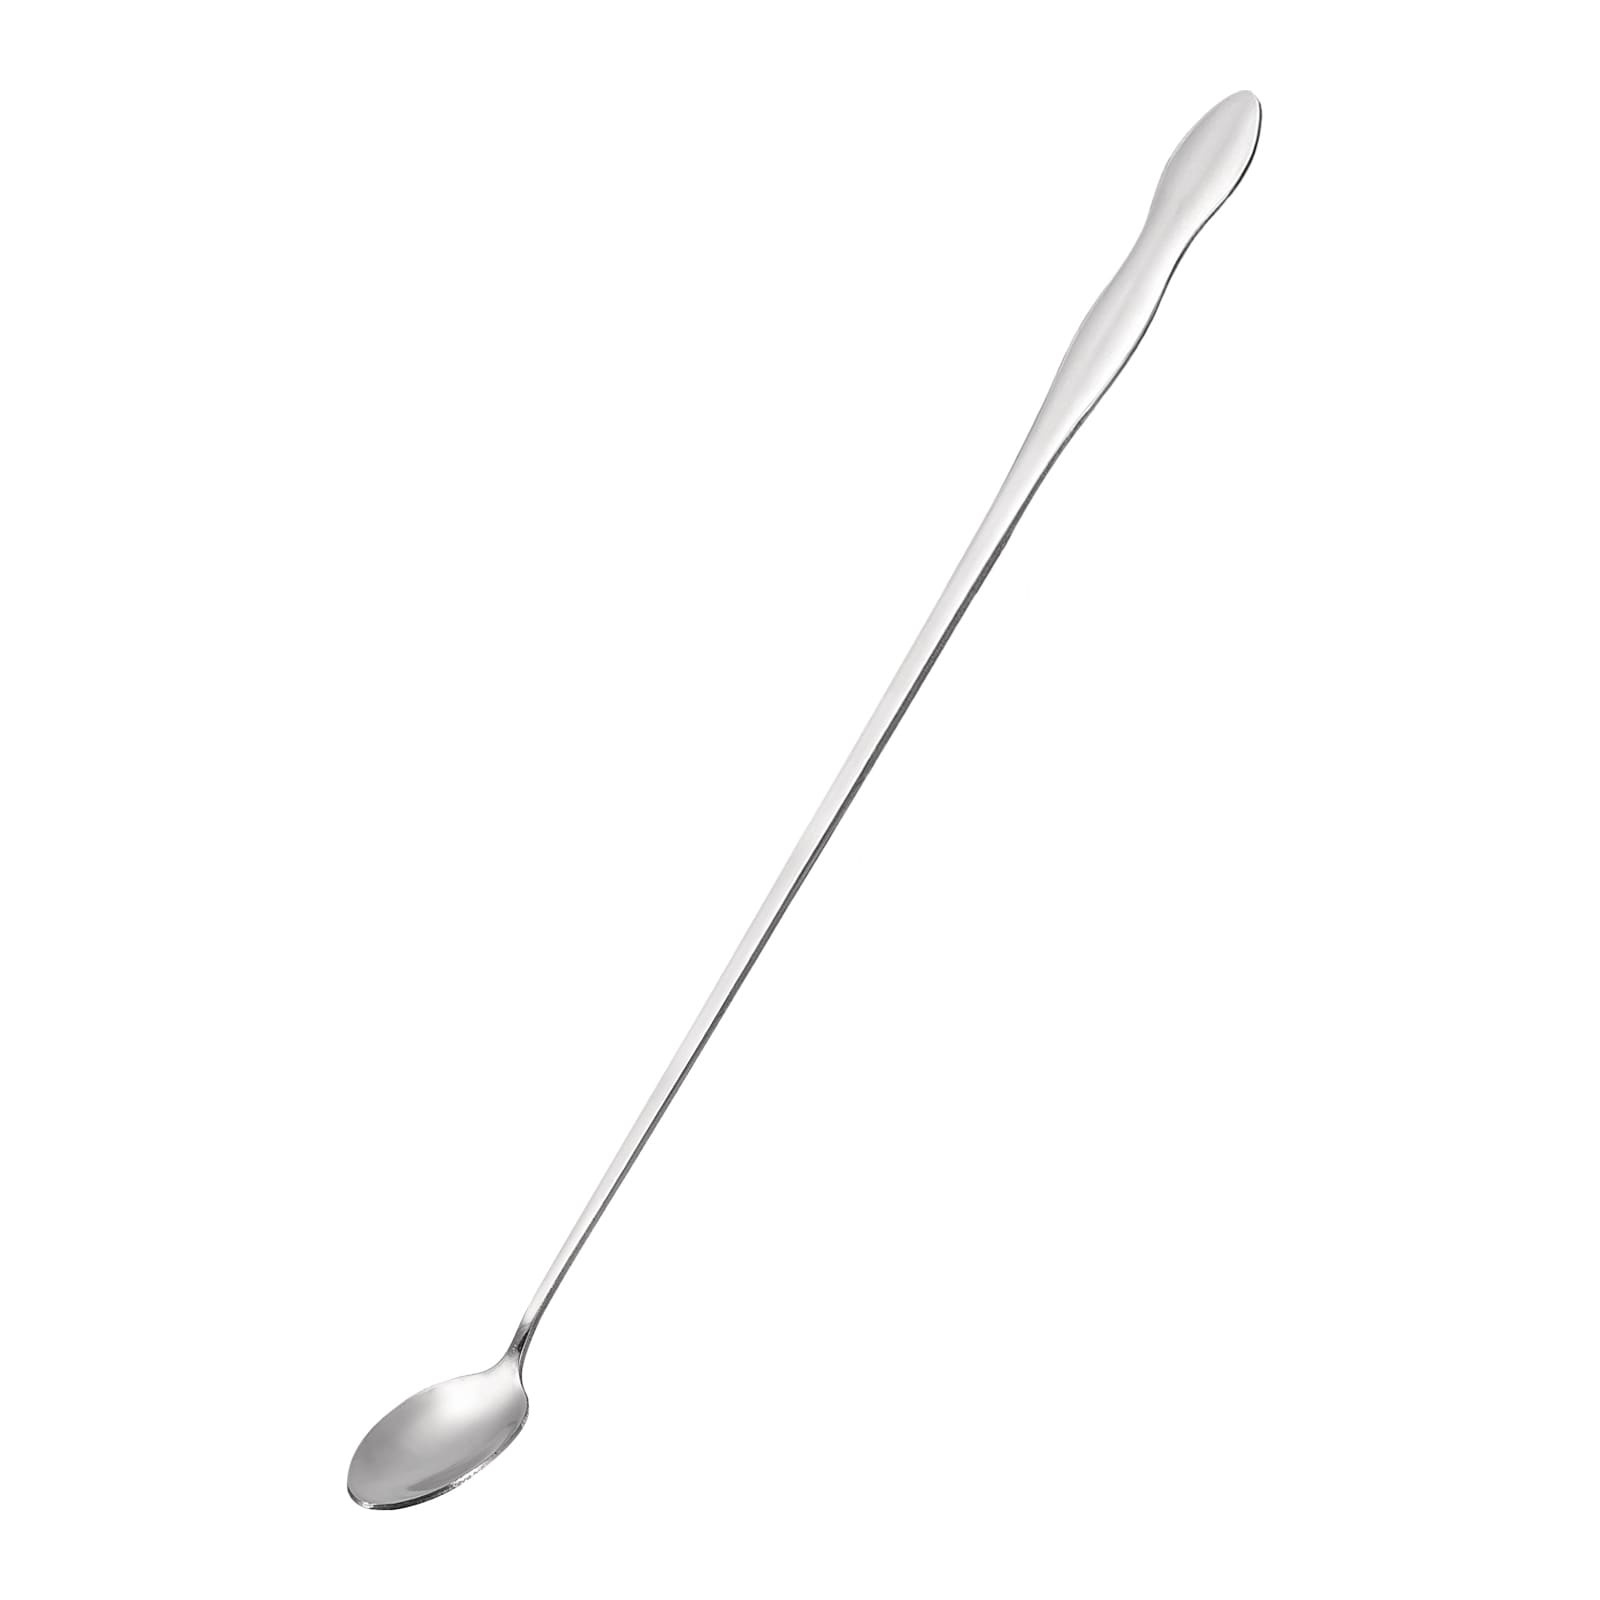 https://ak1.ostkcdn.com/images/products/is/images/direct/13e696819cb636c5a498acd7f44d8ca0ae1513ce/Long-Handle-Spoon%2C-1Pcs-12.4-Inch-Stainless-Steel-Stirring-Spoons.jpg